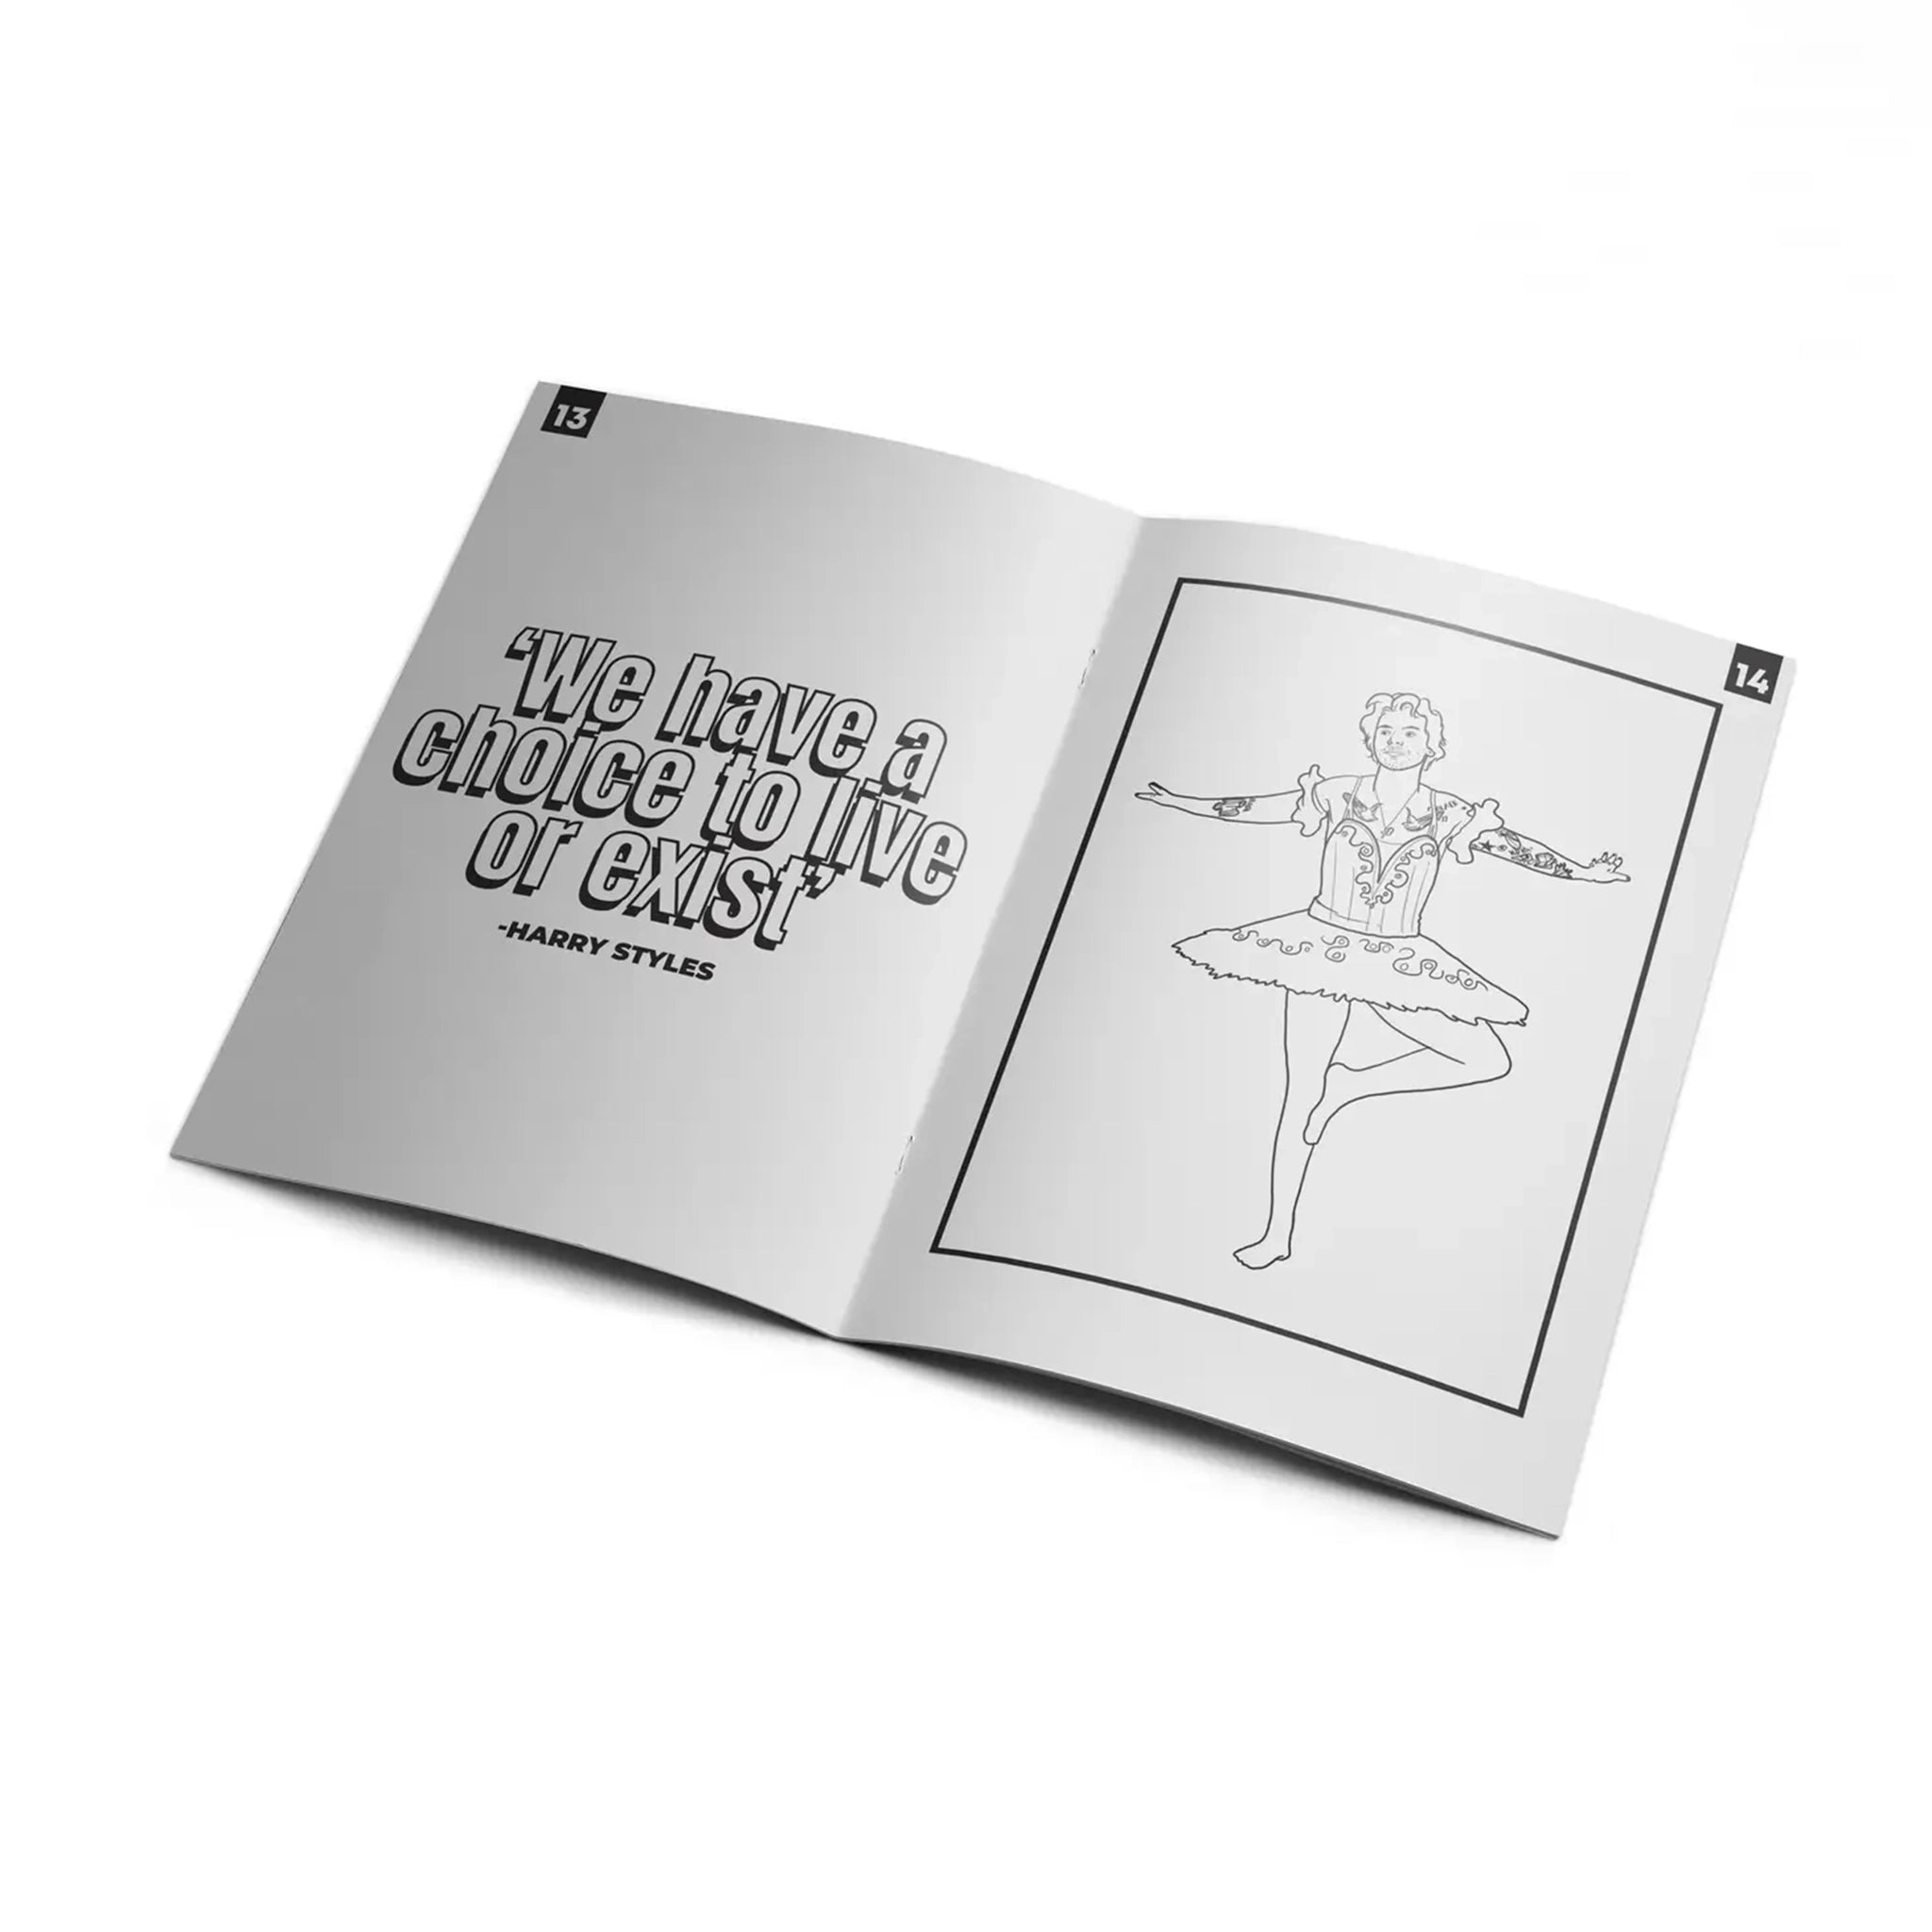 A look inside of the activity book that features quotes and pictures to color inside of the book. This quote reads, "We have a choice to live or exist" along with a illustration of harry in his iconic ballerina outfit.